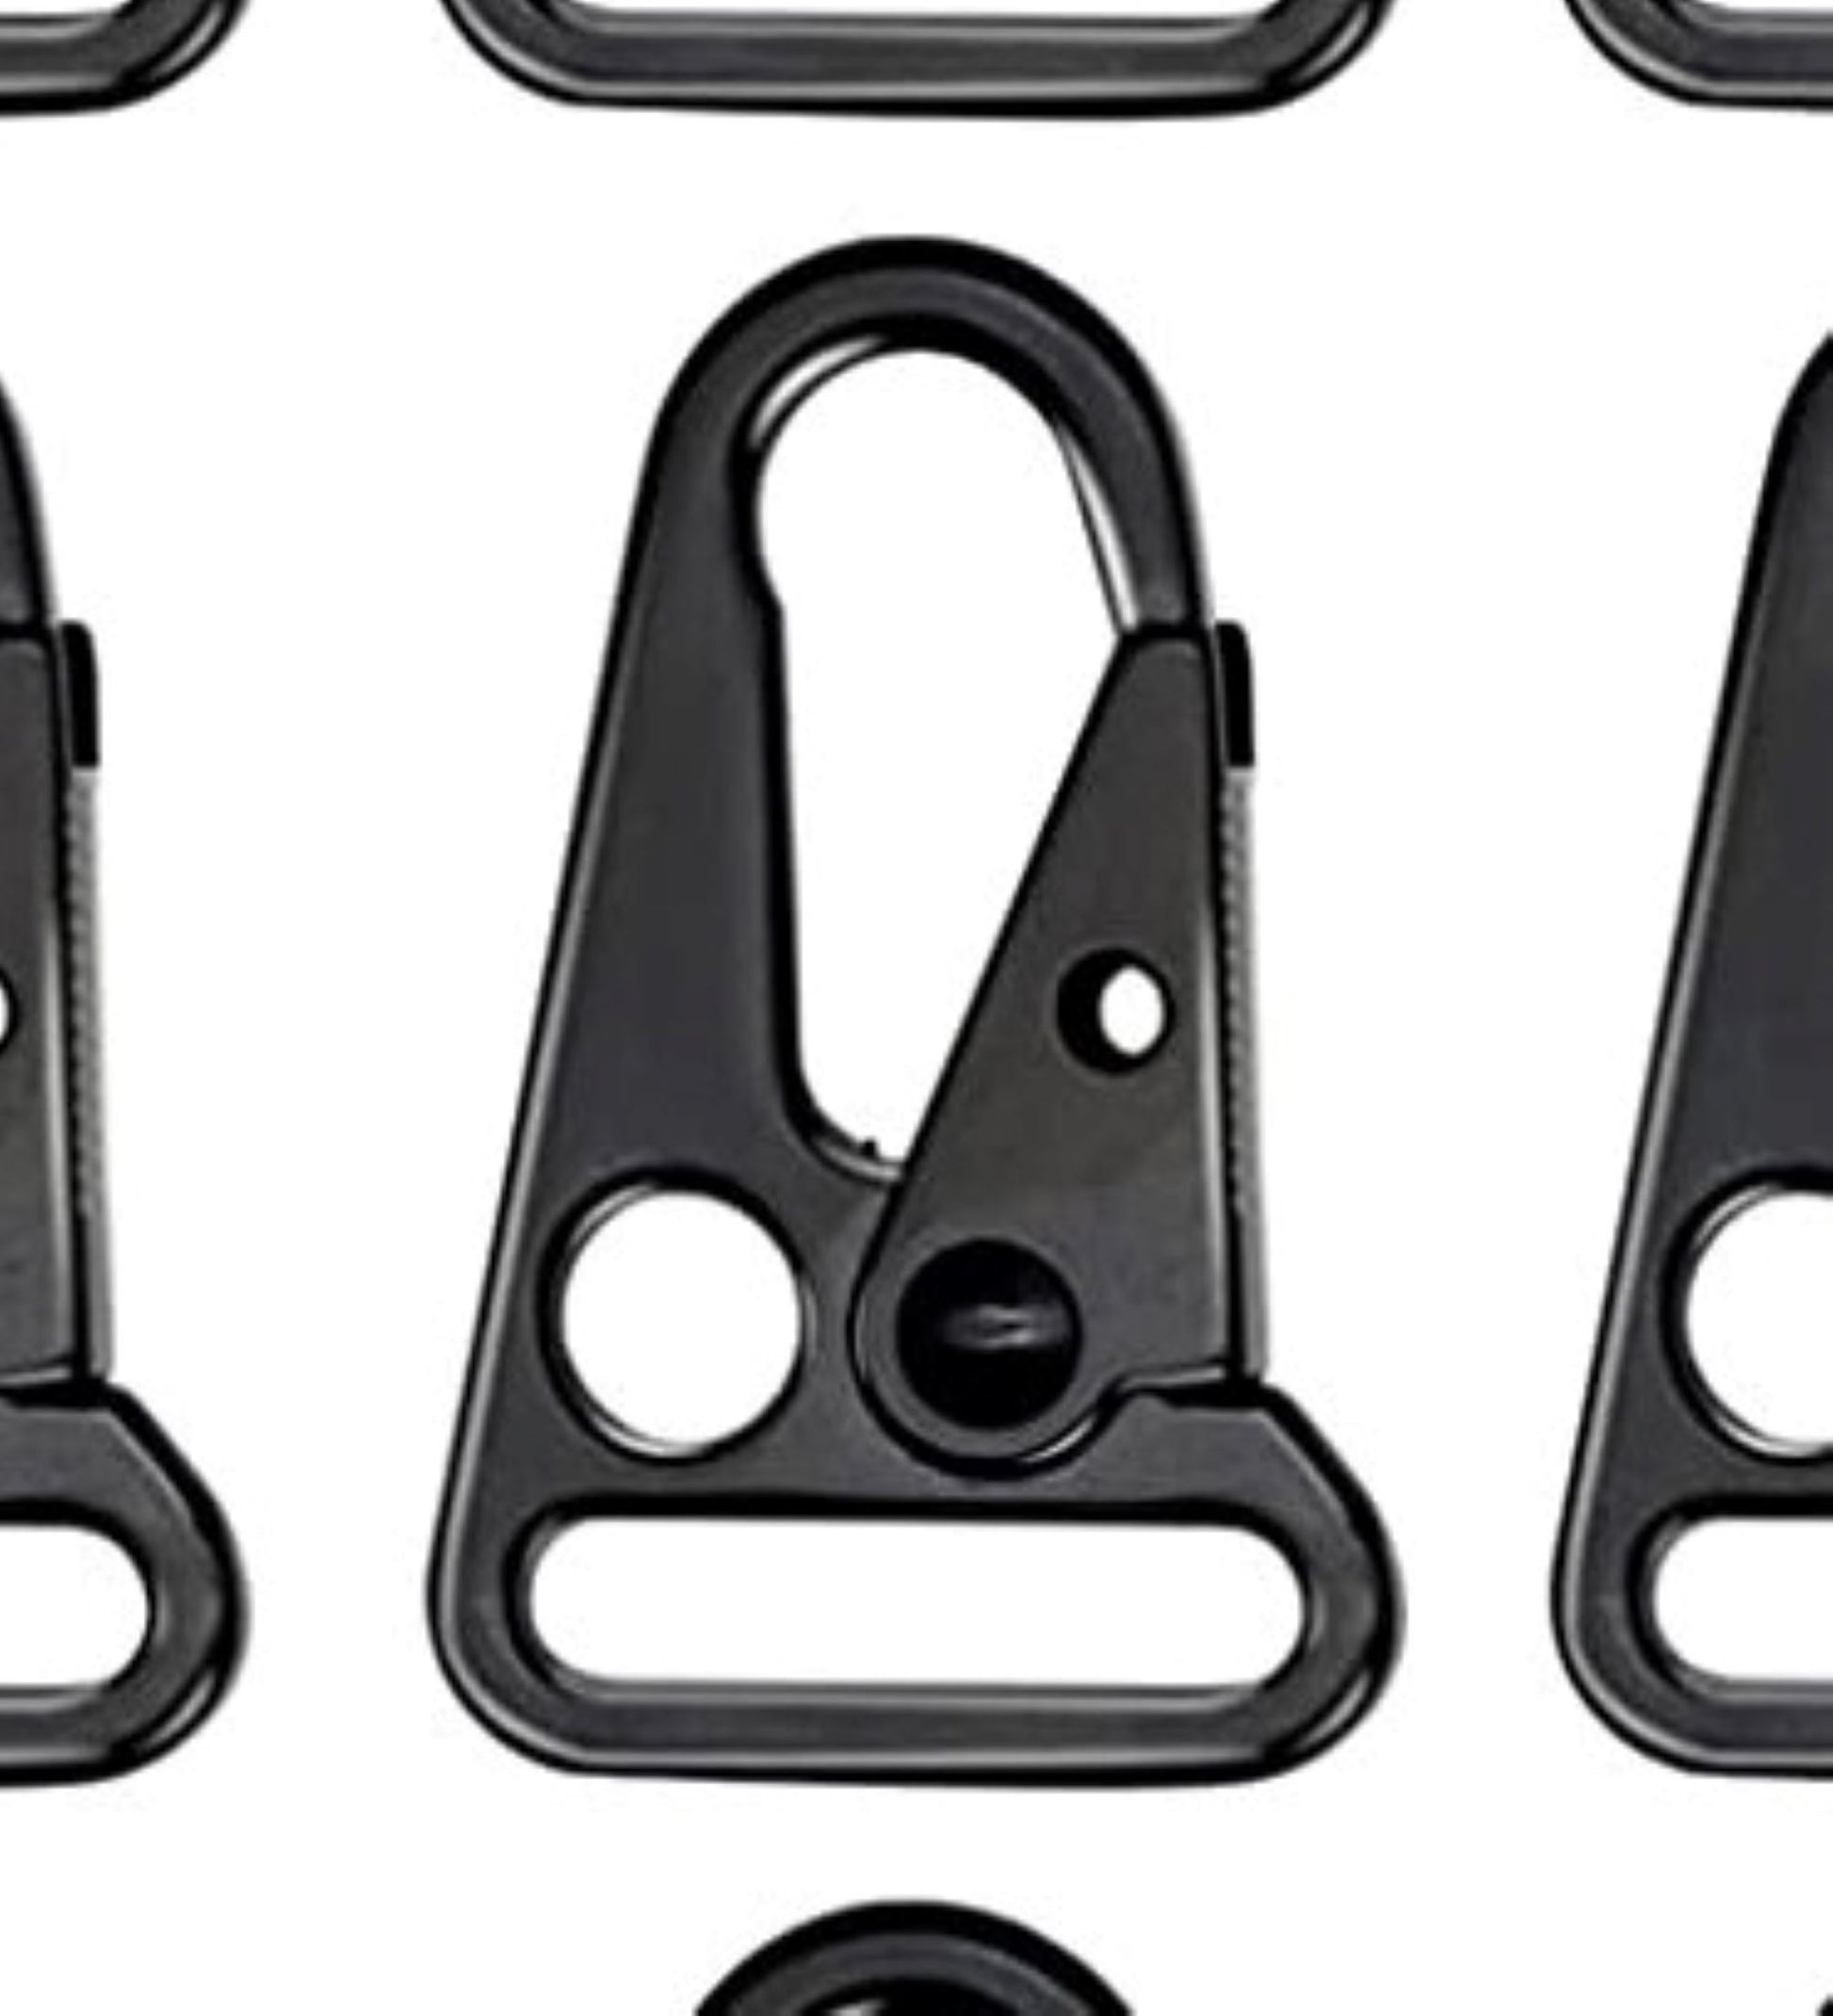 Southern Textiles 1in Heavy Duty HK Snap Hooks Black Metal Clip Hooks Attach Webbing Belt Clip Keychain Rings Carrying Tools 6 Pack